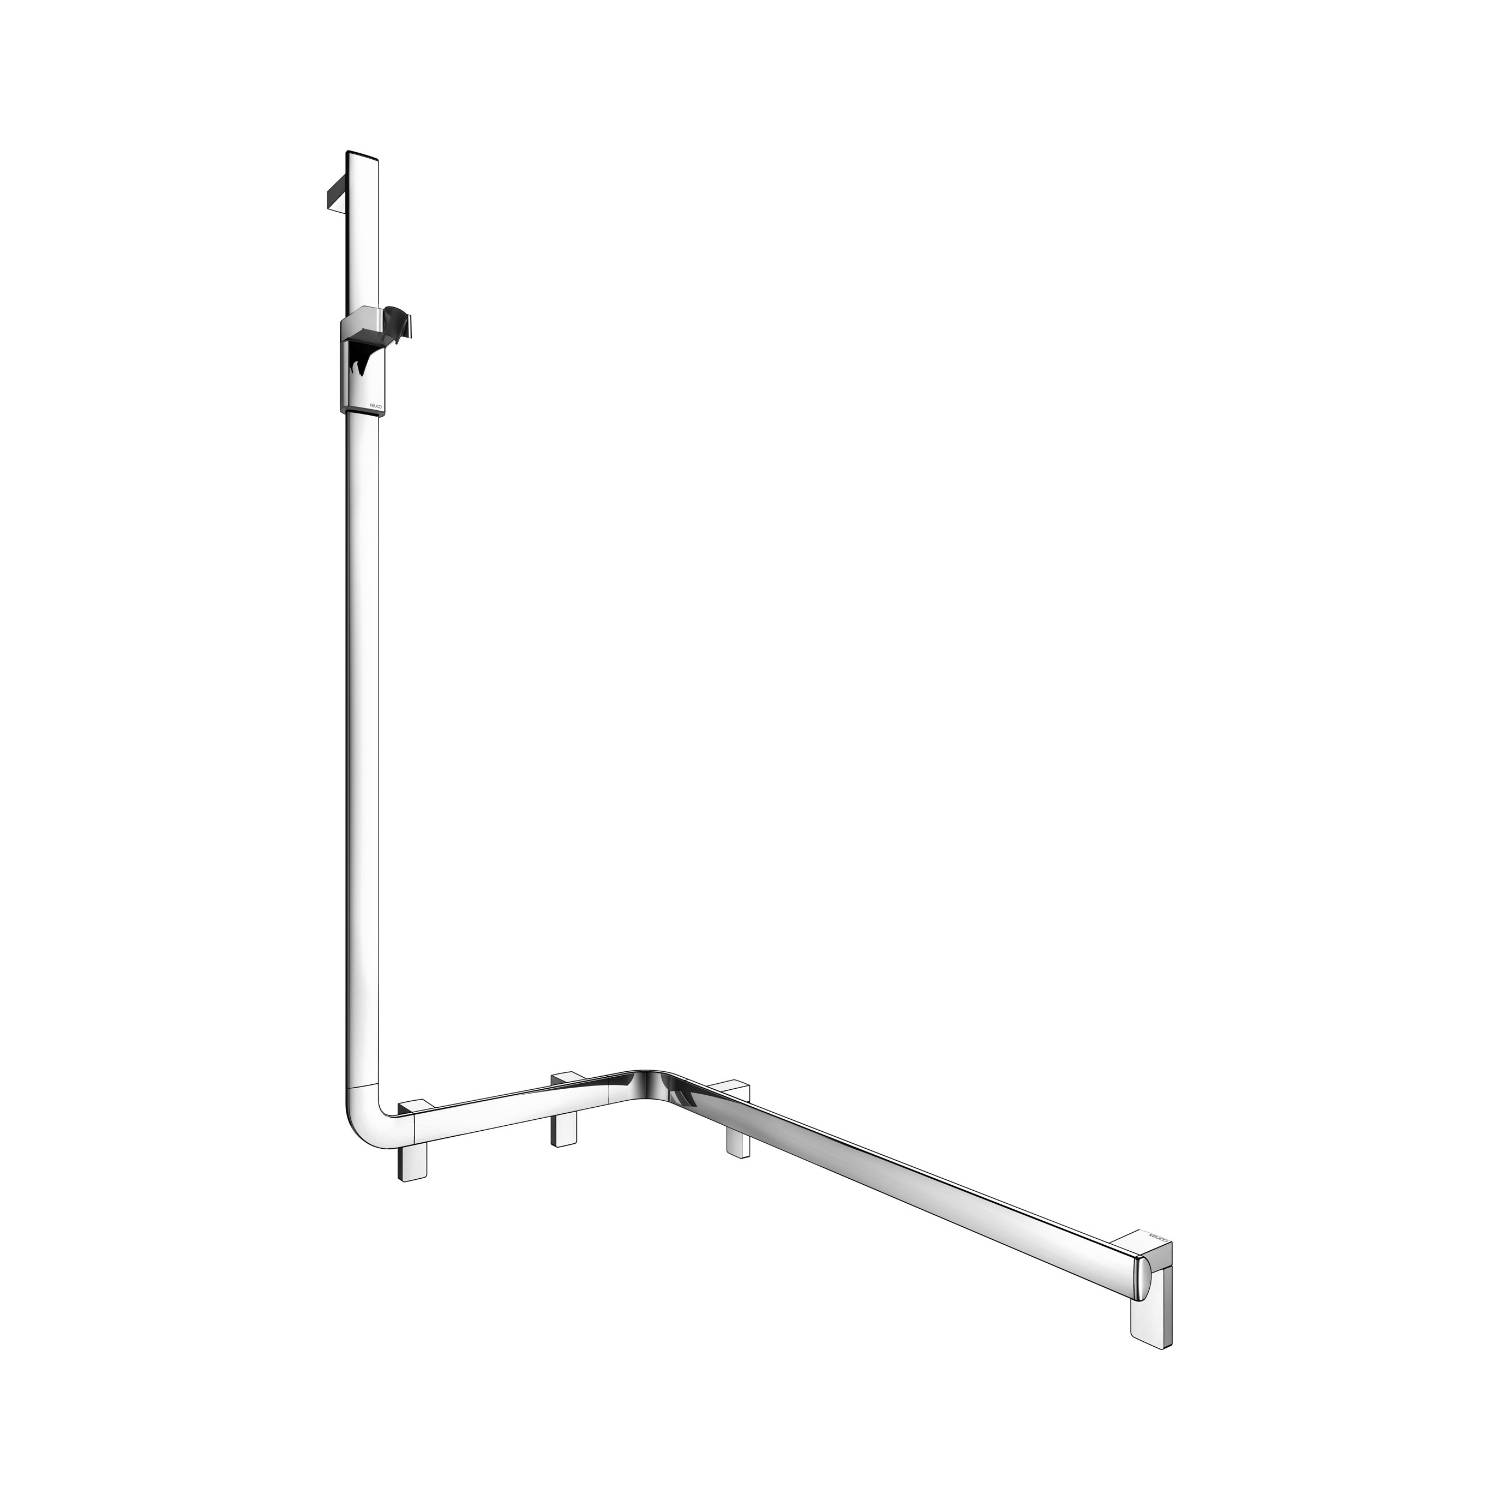 35015 Rail system with hand shower bracket - AXESS